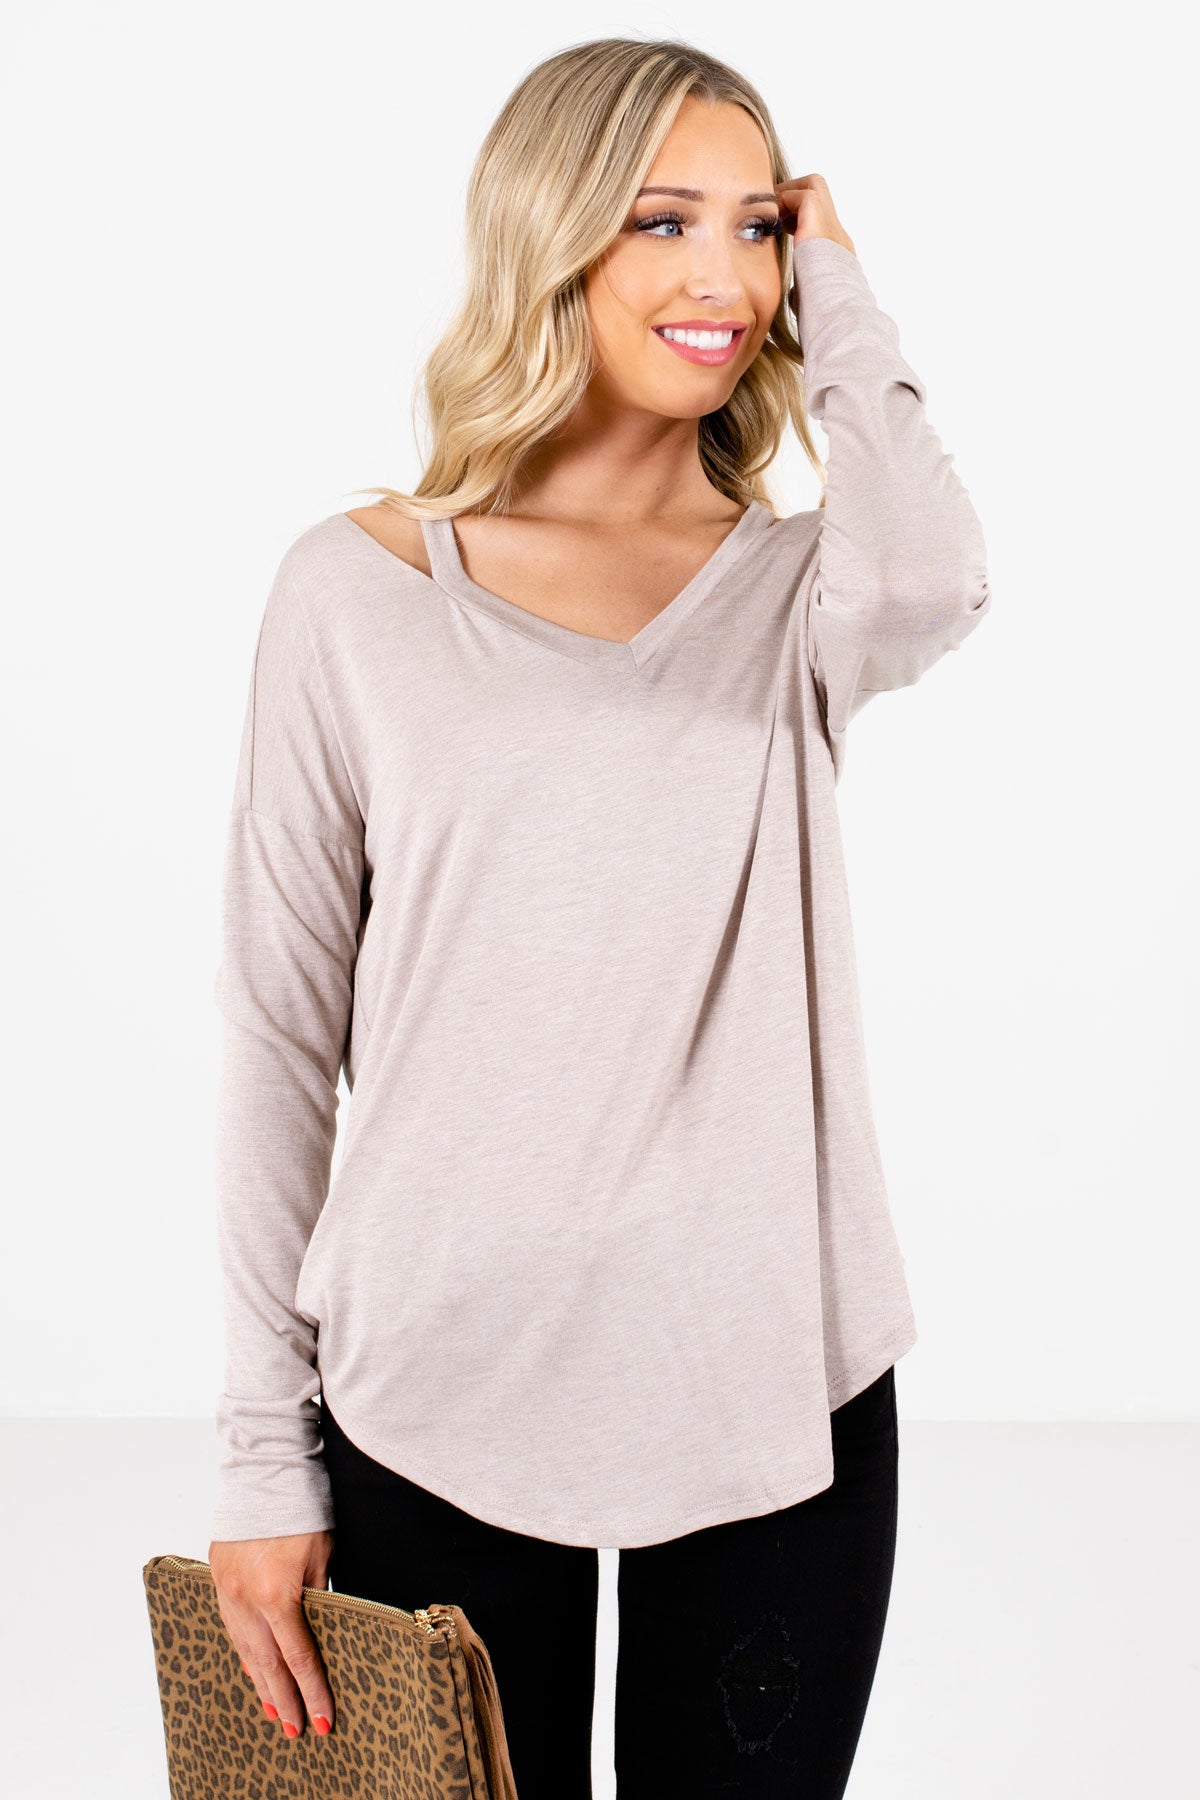 Women's Taupe Brown Rounded Hem Boutique Tops